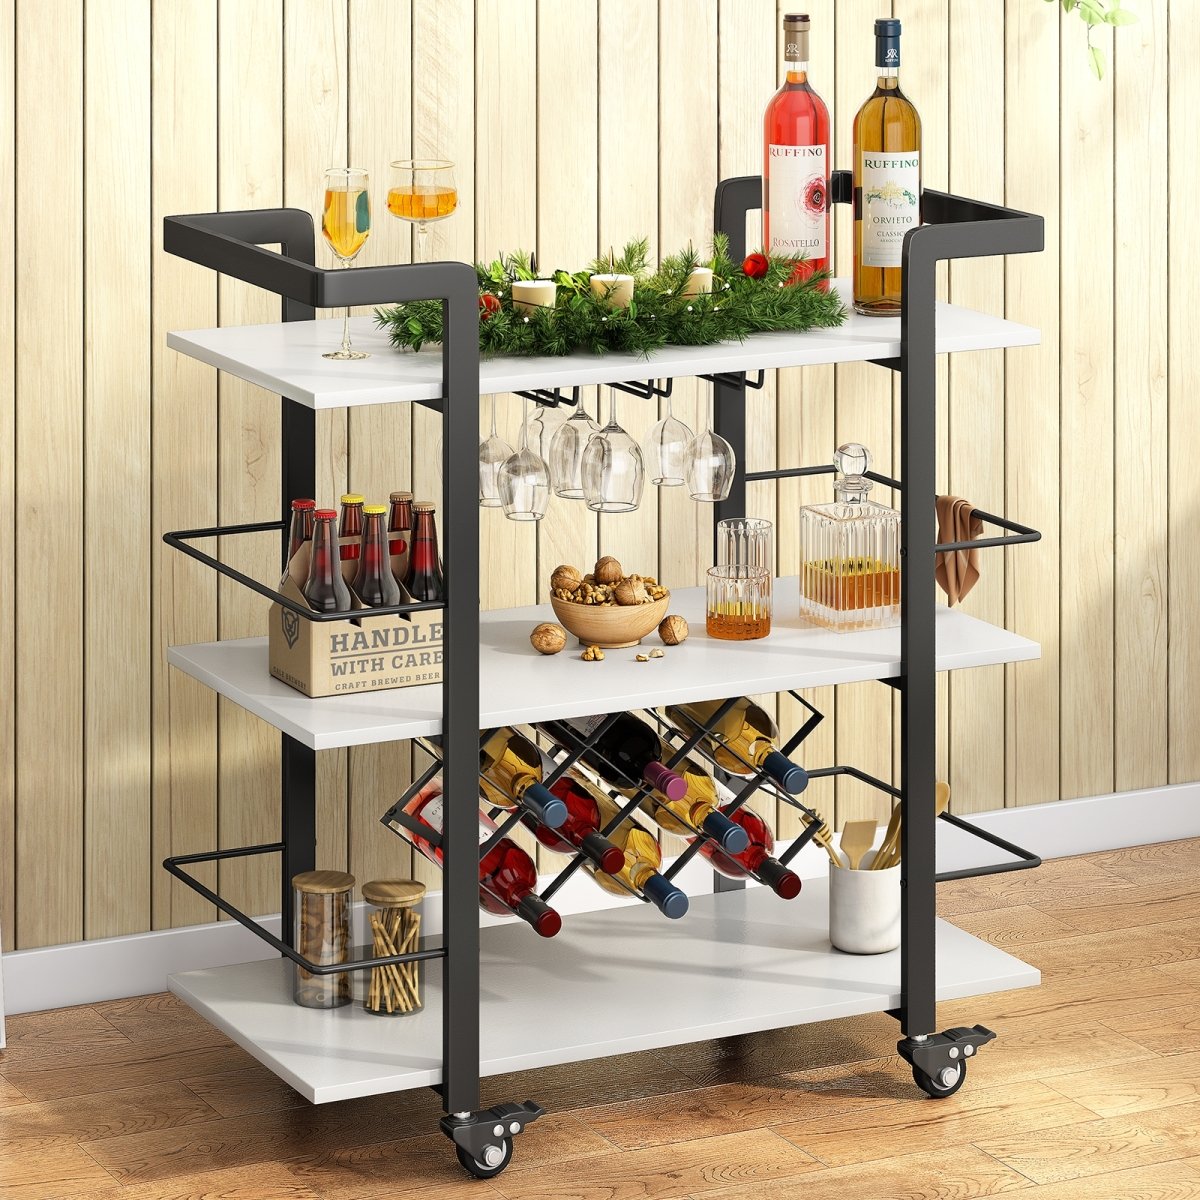 Bar Carts | Home Bar & Serving Carts with Wine Bottle Storage and Locking Casters - MjkoneCabinets